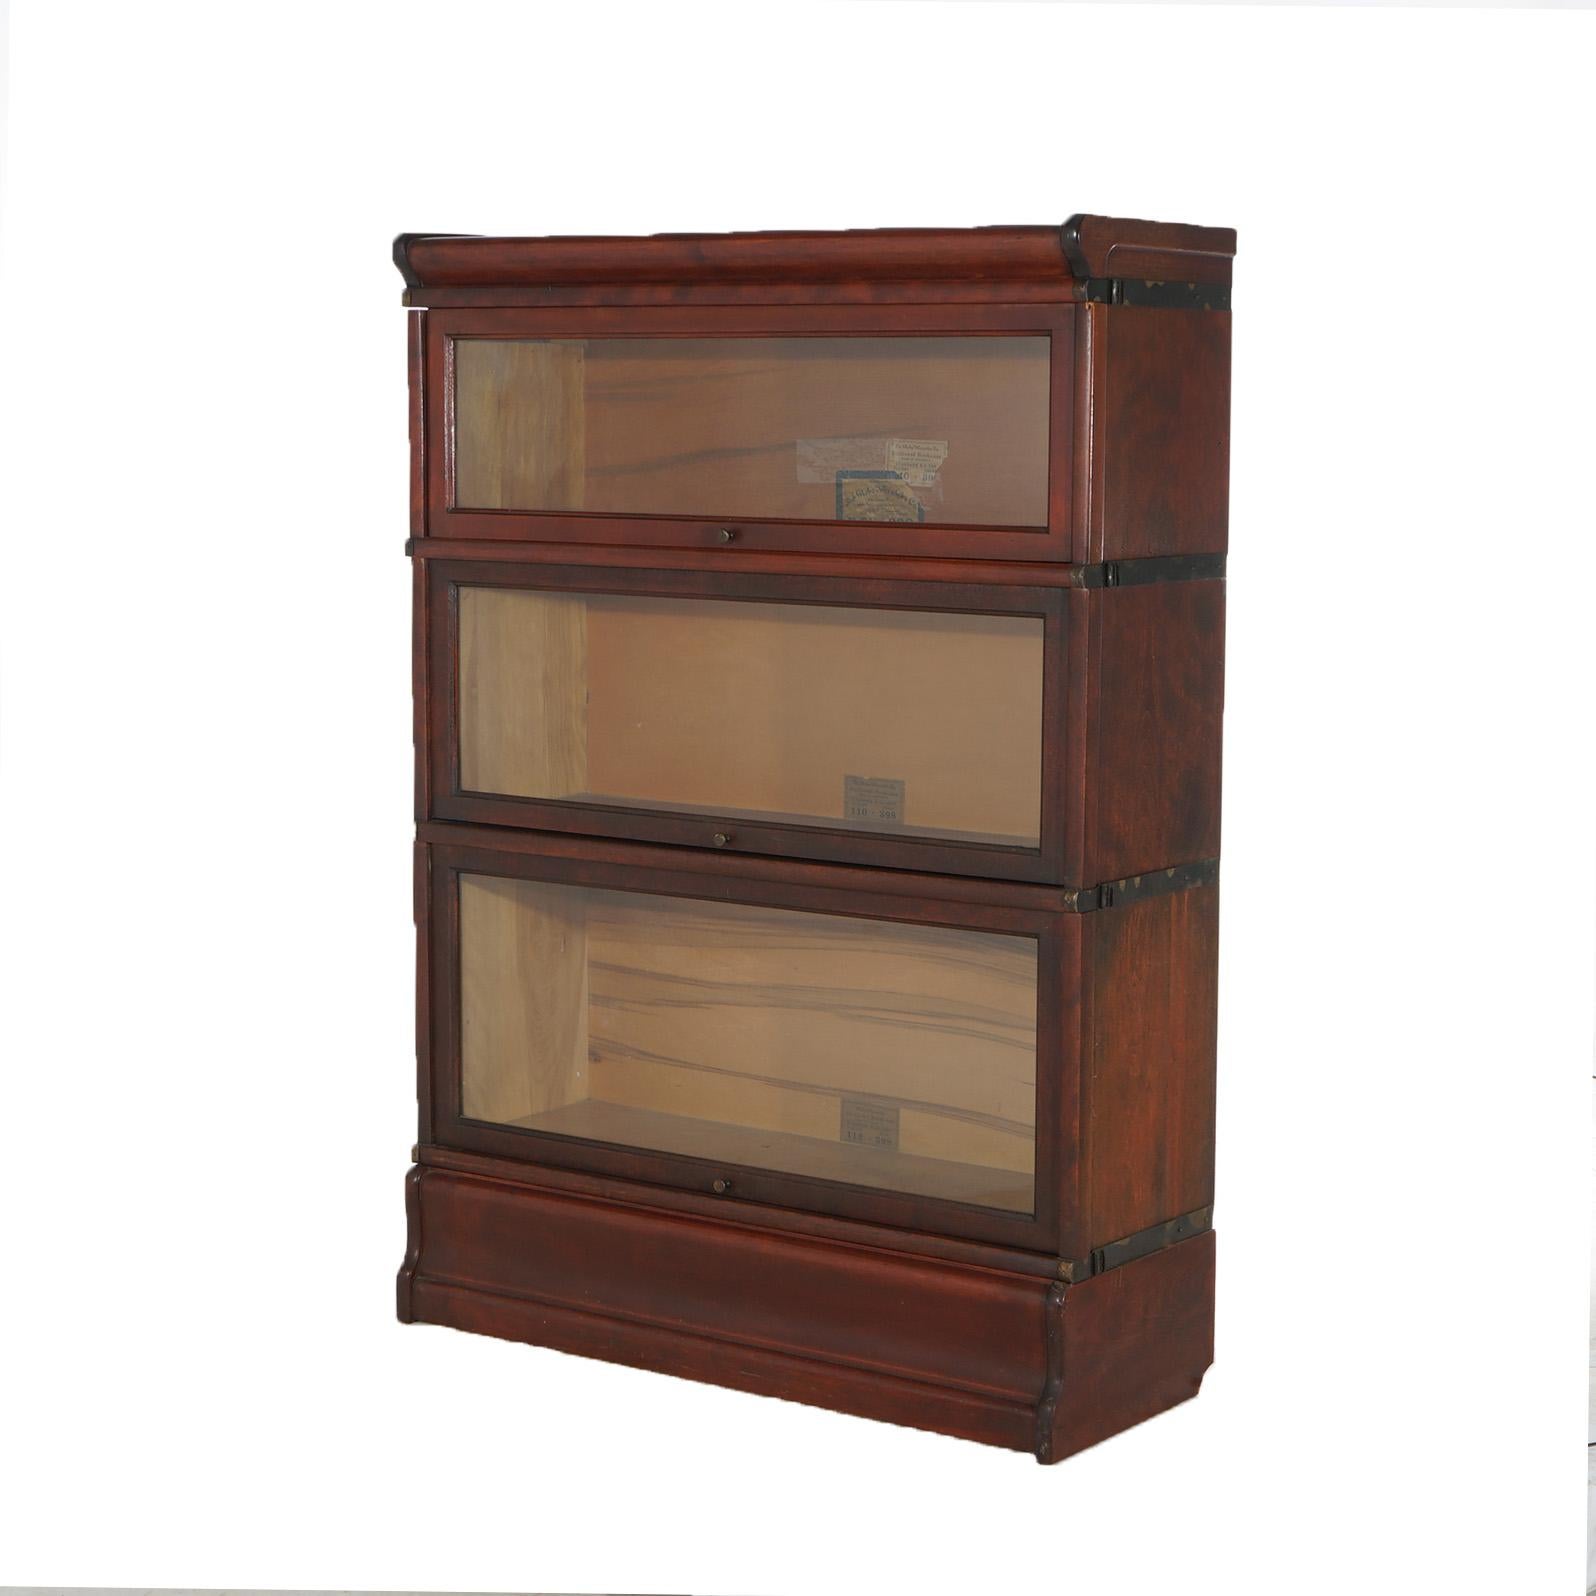 An antique Arts & Crafts barrister bookcase by Globe Wernicke offers mahogany construction with three stacks, each having pull-out glass doors and seated on ogee base, maker label as photographed, c1920

Measures - 47.5